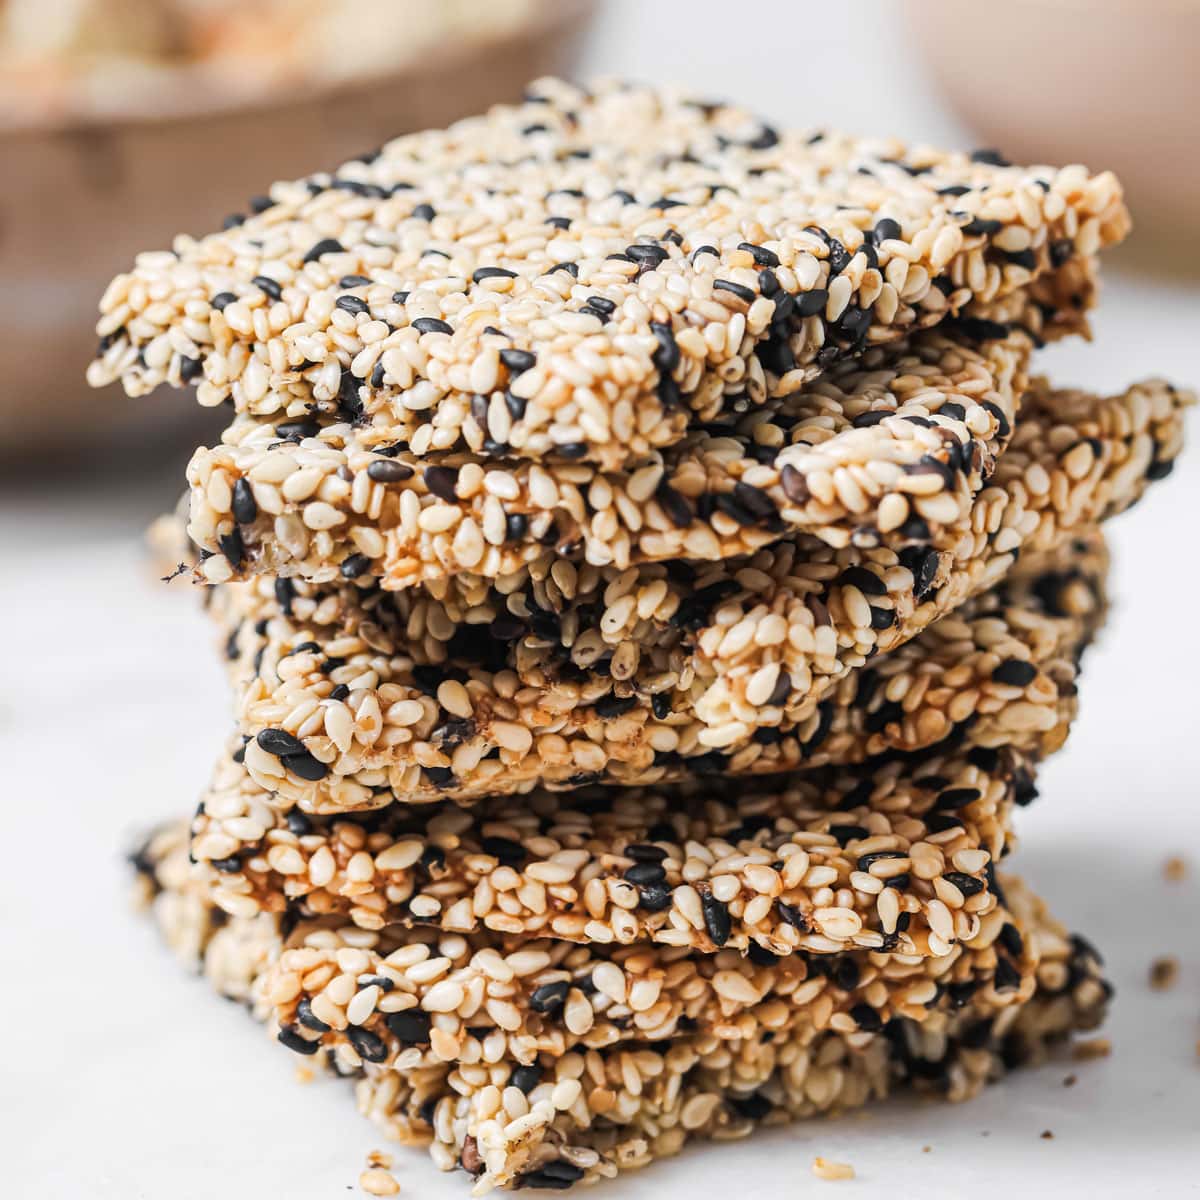 A stack of sesame crackers made with black and white sesame seeds.